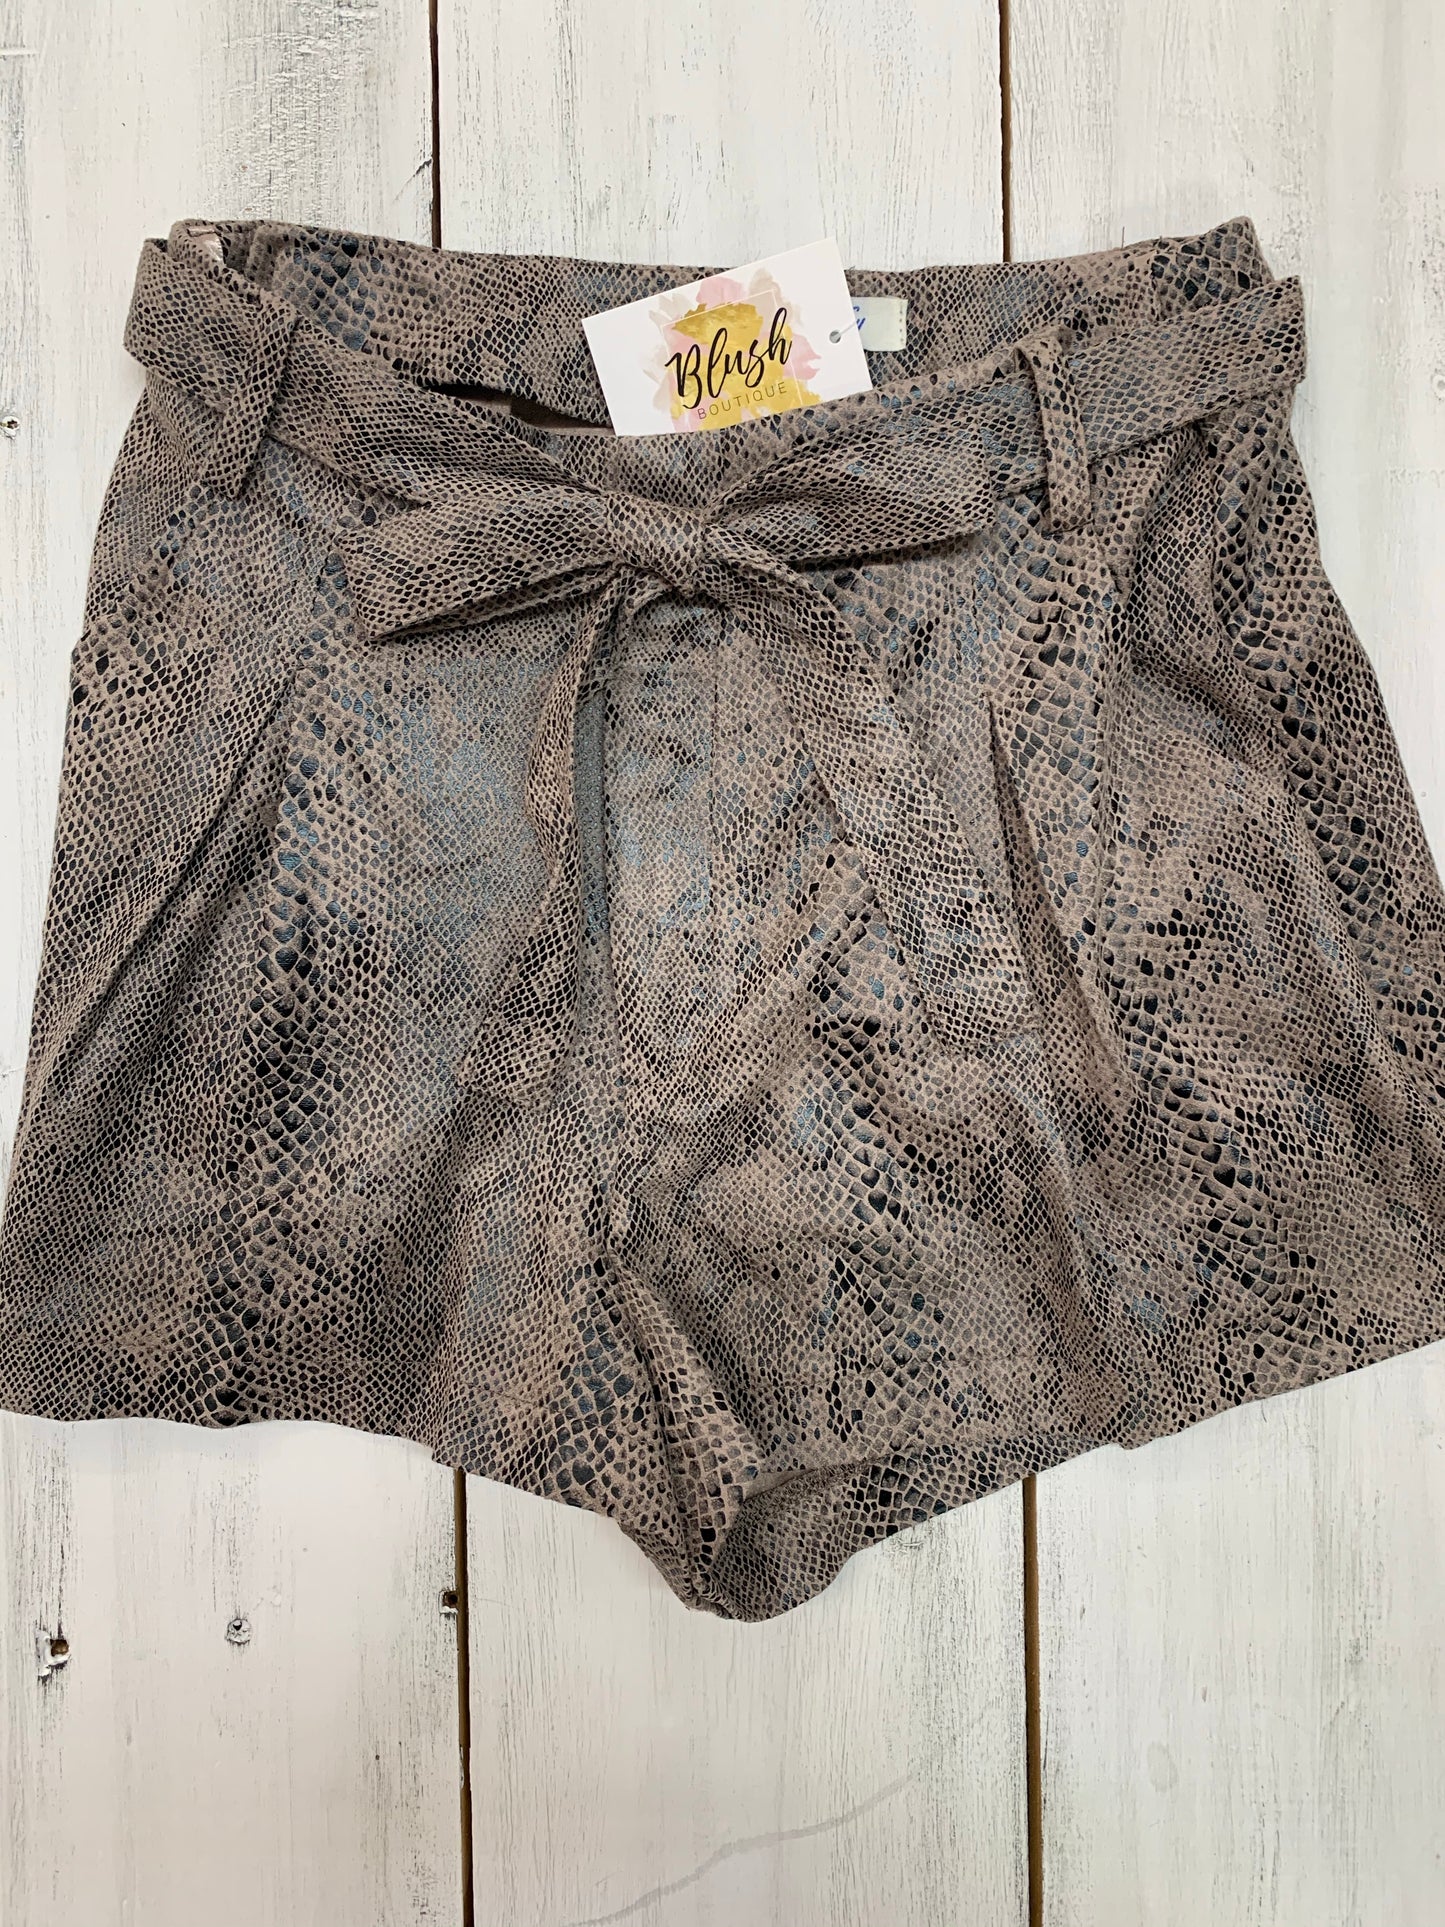 Suede Snake Print Shorts